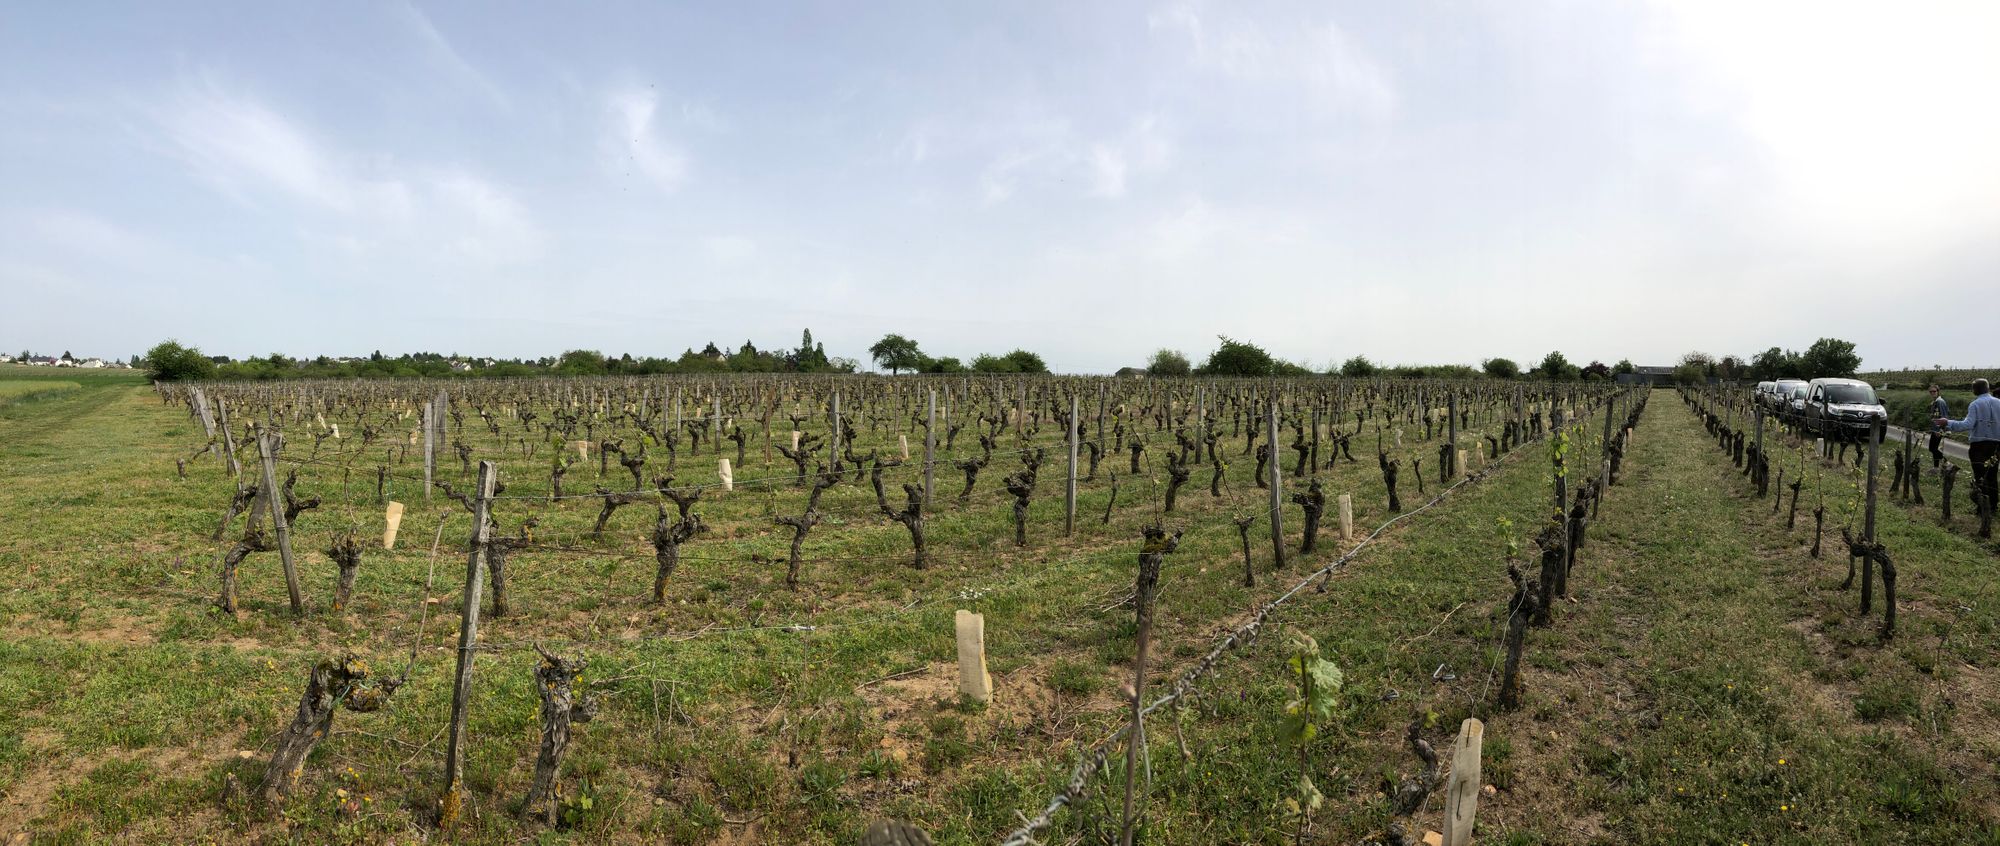 Pierre & Bertrand Couly - Vineyard